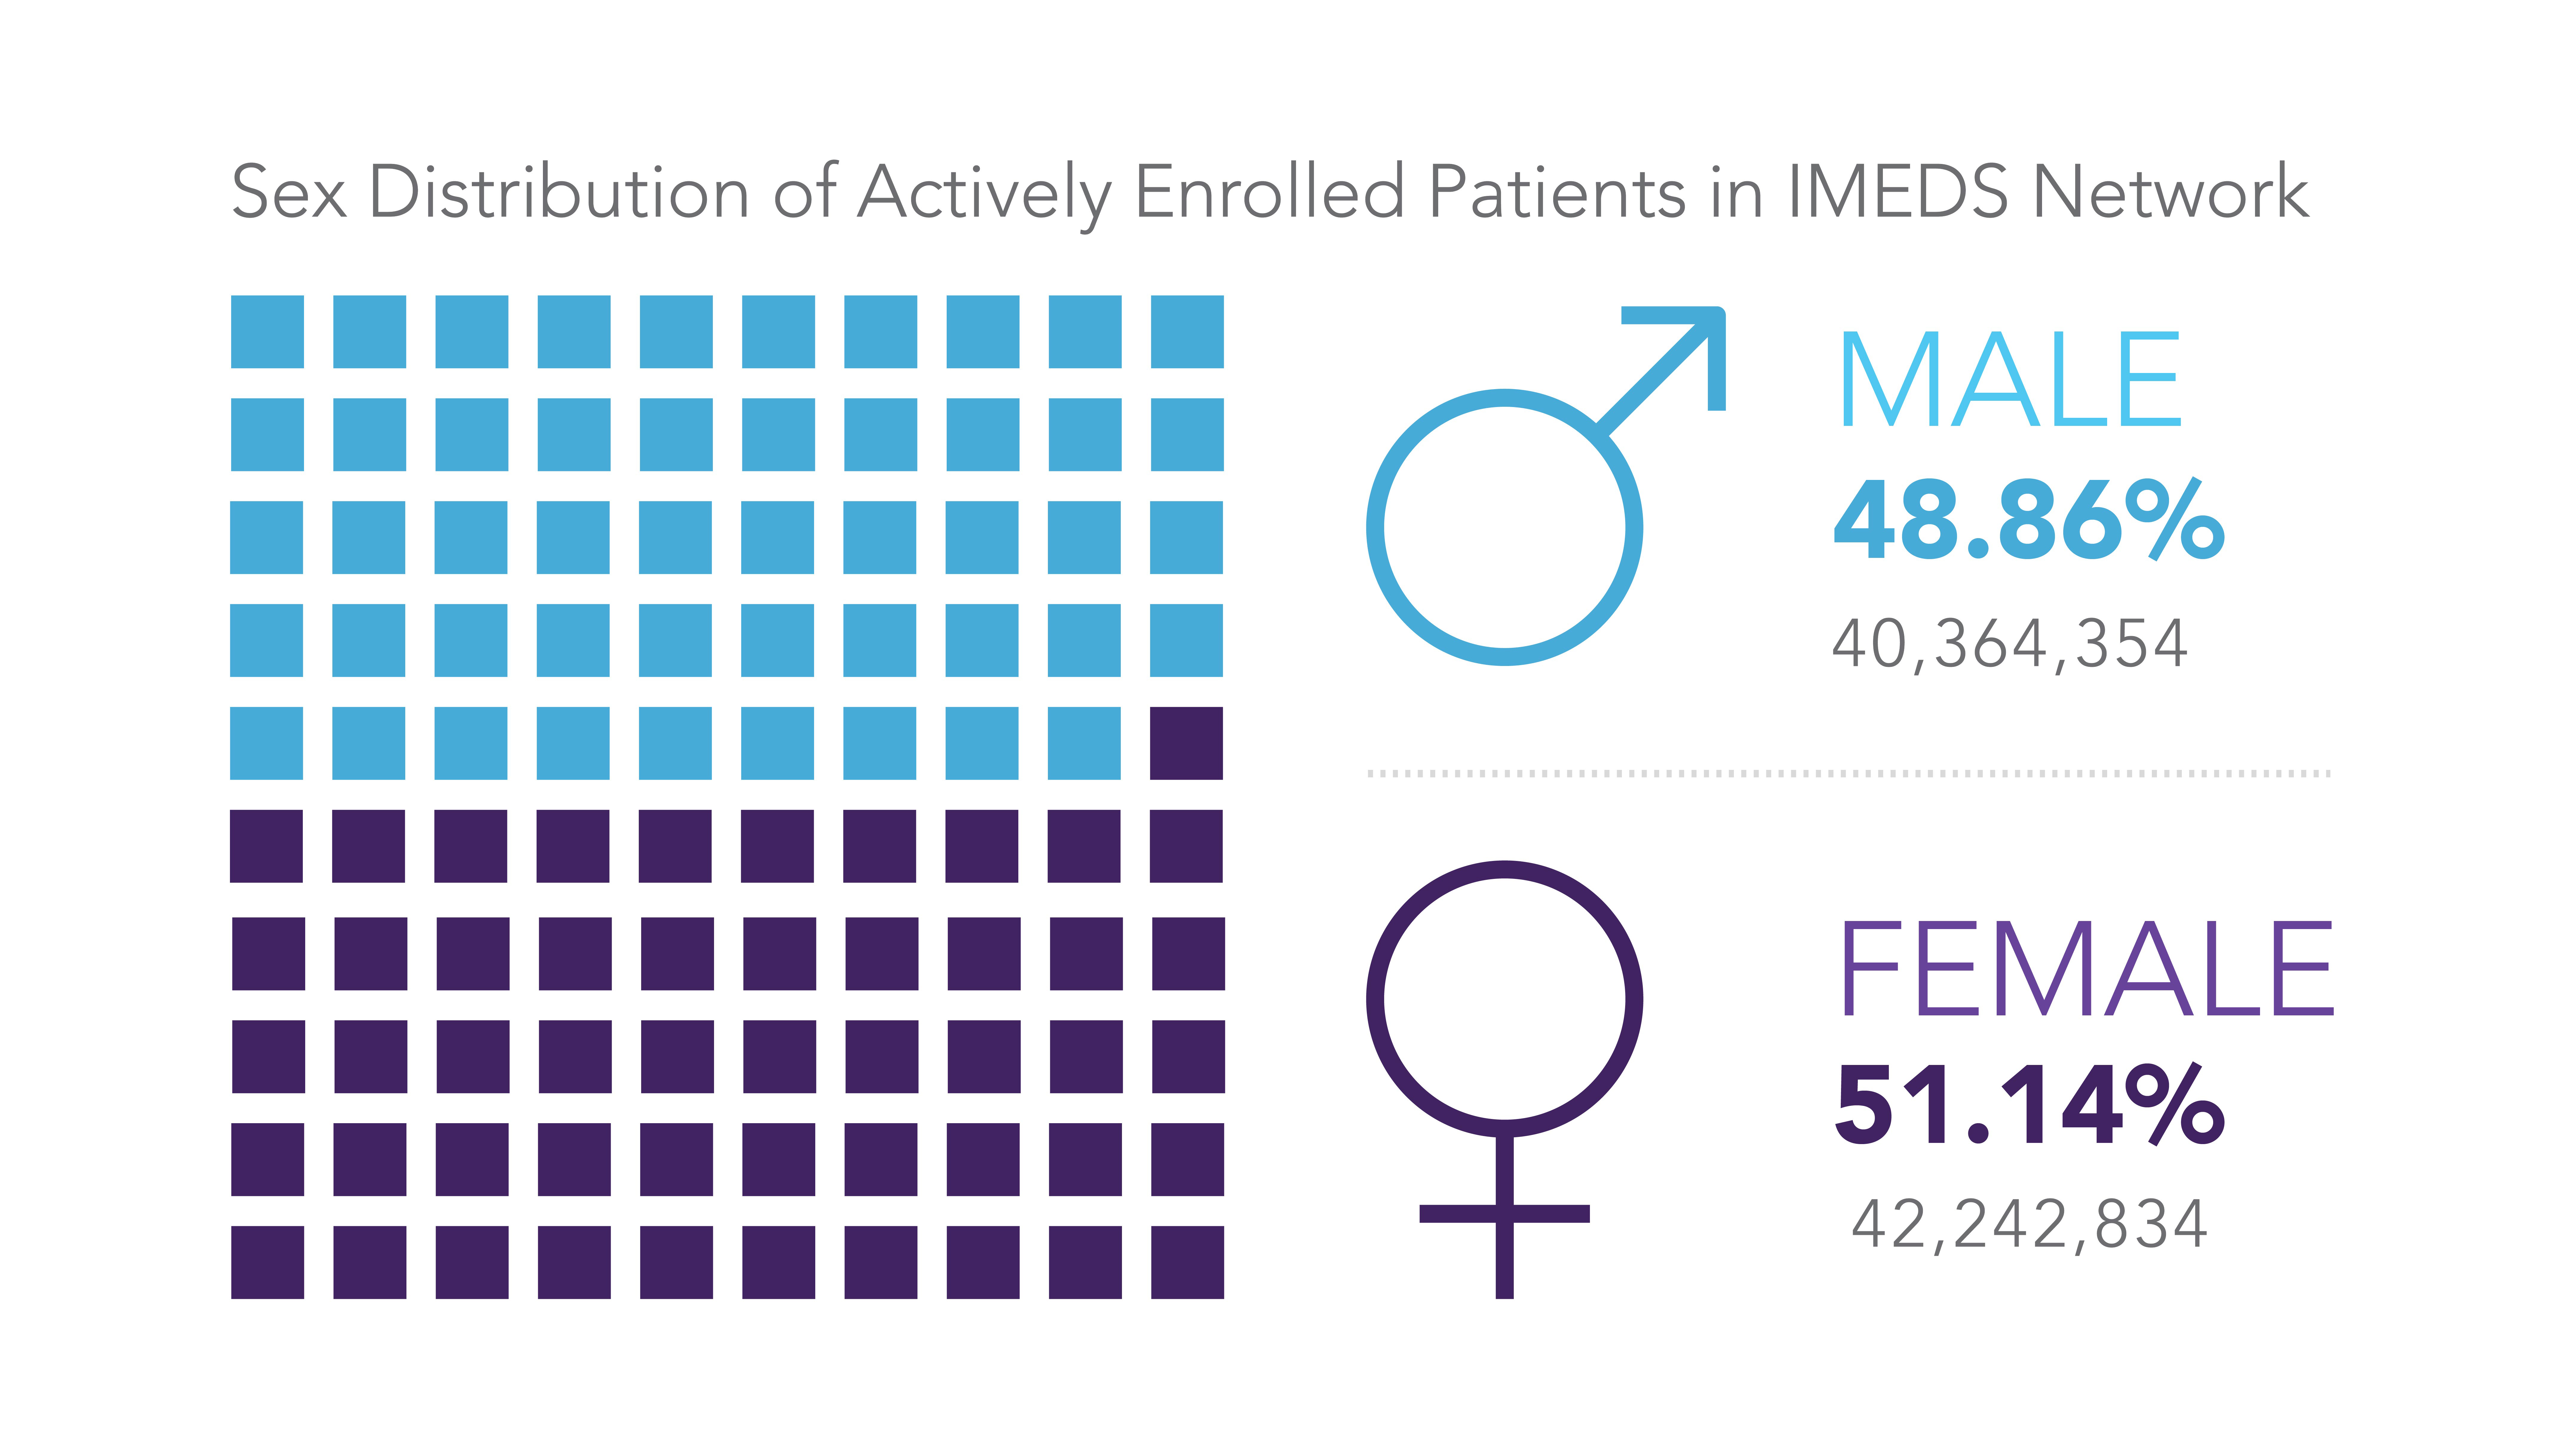 Sex Distribution of Actively Enrolled Patients IMEDS Network